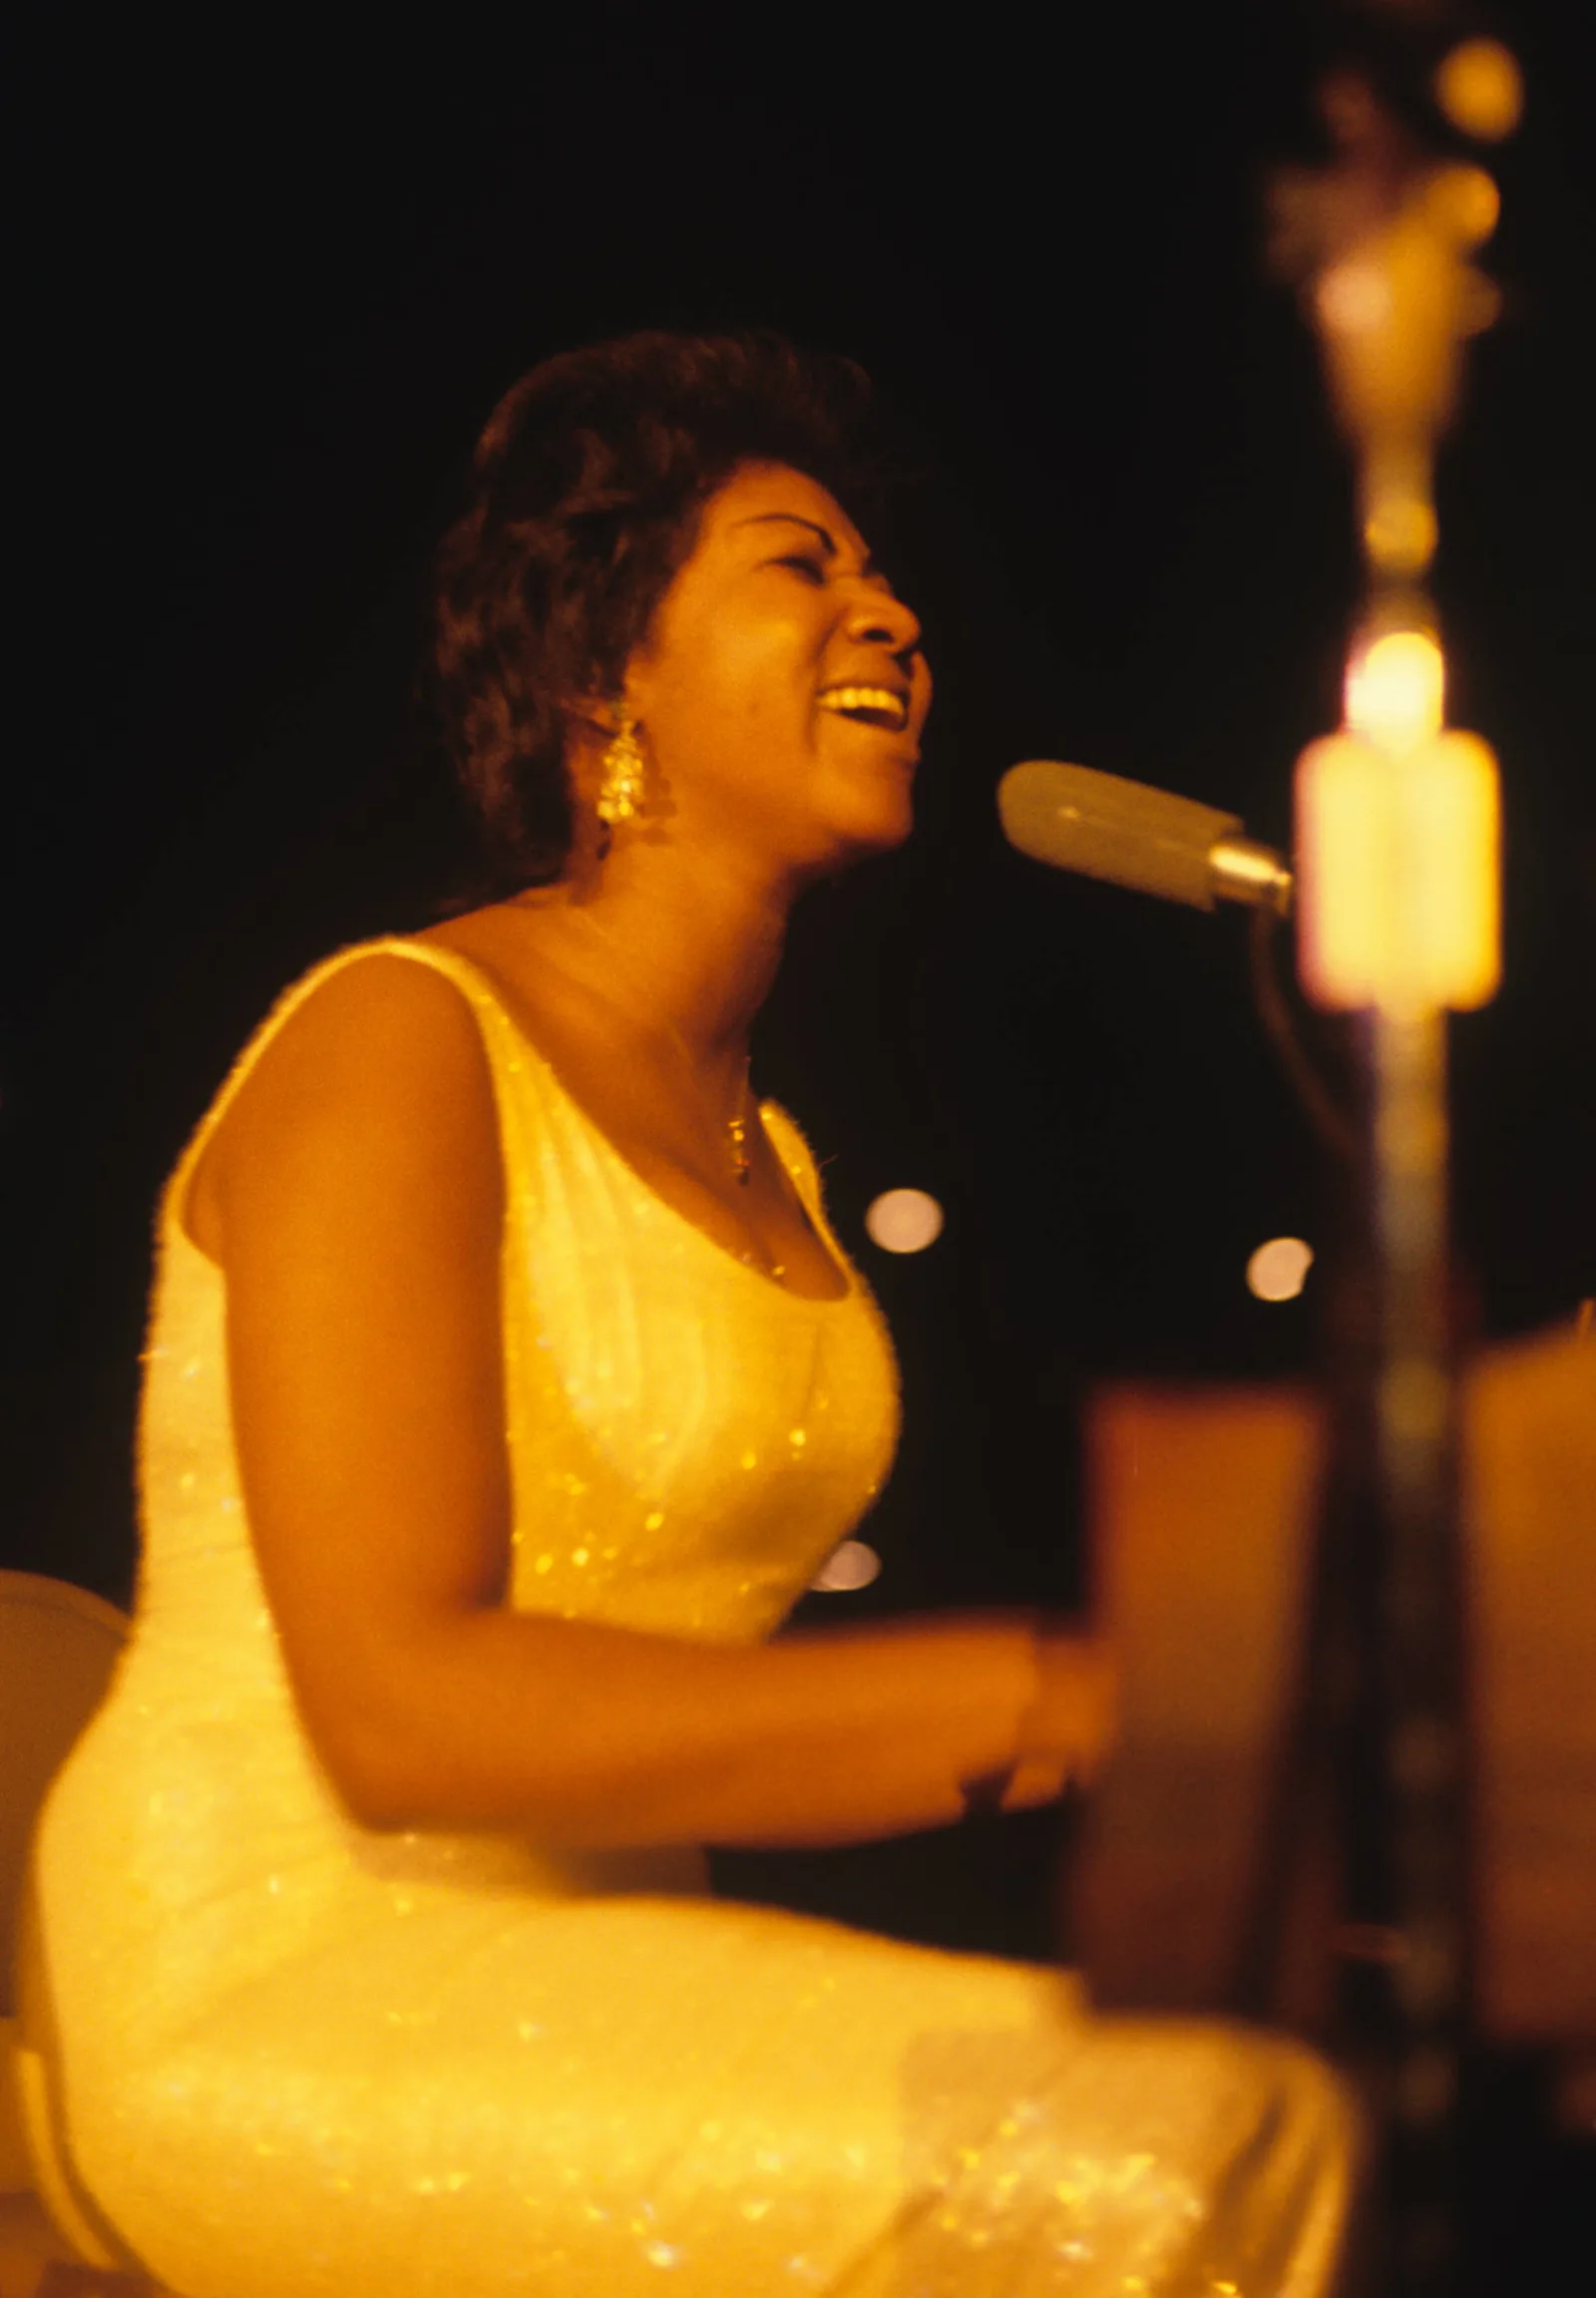 1960 - A young singer named Aretha Franklin, then 18, gets her start performing professionally at the Playboy Club in Chicago which is established with a clear stance on segregation: Performers and patrons, black or white, would be welcome through the venue’s main entrance. This was in contrast to having them enter through the kitchen, a common practice at the time. When Playboy learns that the Club franchises in New Orleans and Miami were refusing to admit blacks, they buy back the operating licenses for those clubs. “We are outspoken foes of segregation,” Playboy writes. “We are actively involved in the fight to see the end of all racial inequalities in our time. Other notable Playboy Club performers: Sonny & Cher, Tina Turner, Sammy Davis Jr. Lilly Tomlin, Bette Midler, Richard Pryor, George Carlin, Joan Rivers, Eartha Kitt, Ray Charles and more. (Image: Aretha Franklin by Walt Burton.)
